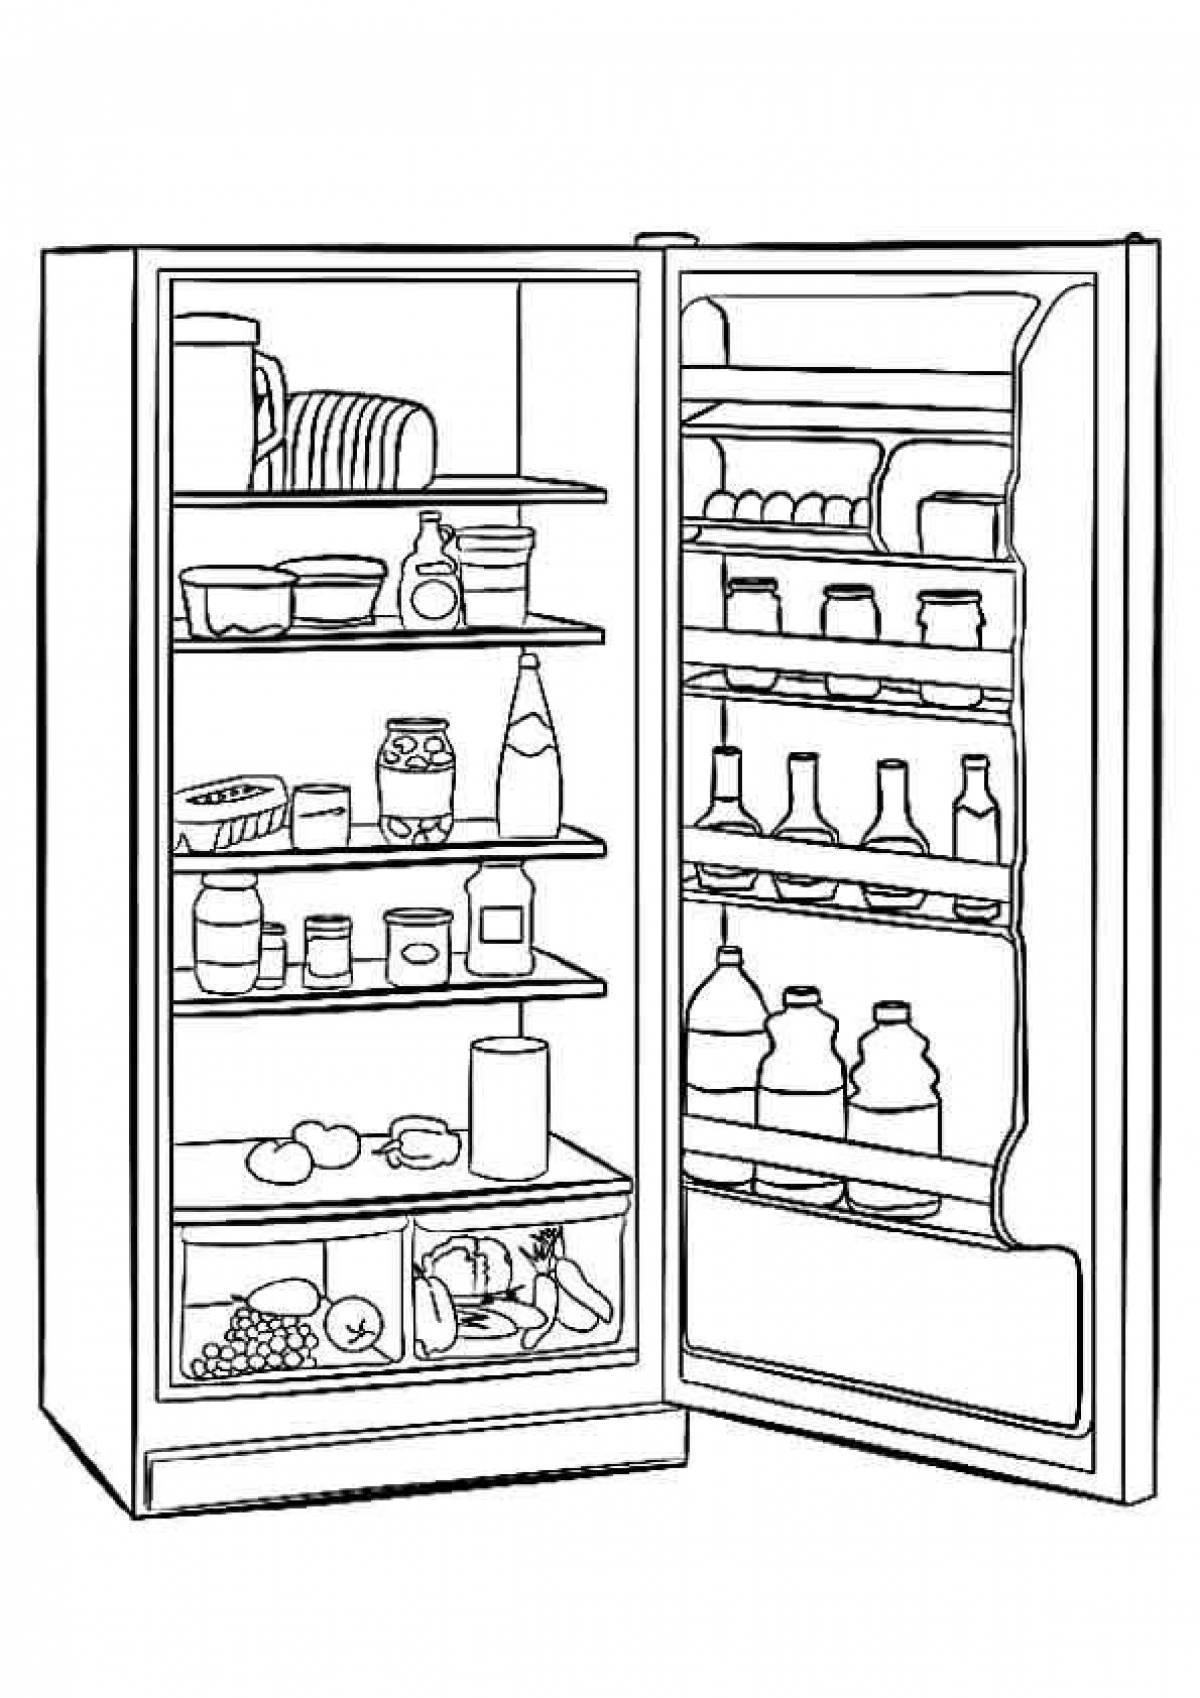 Large refrigerator coloring page